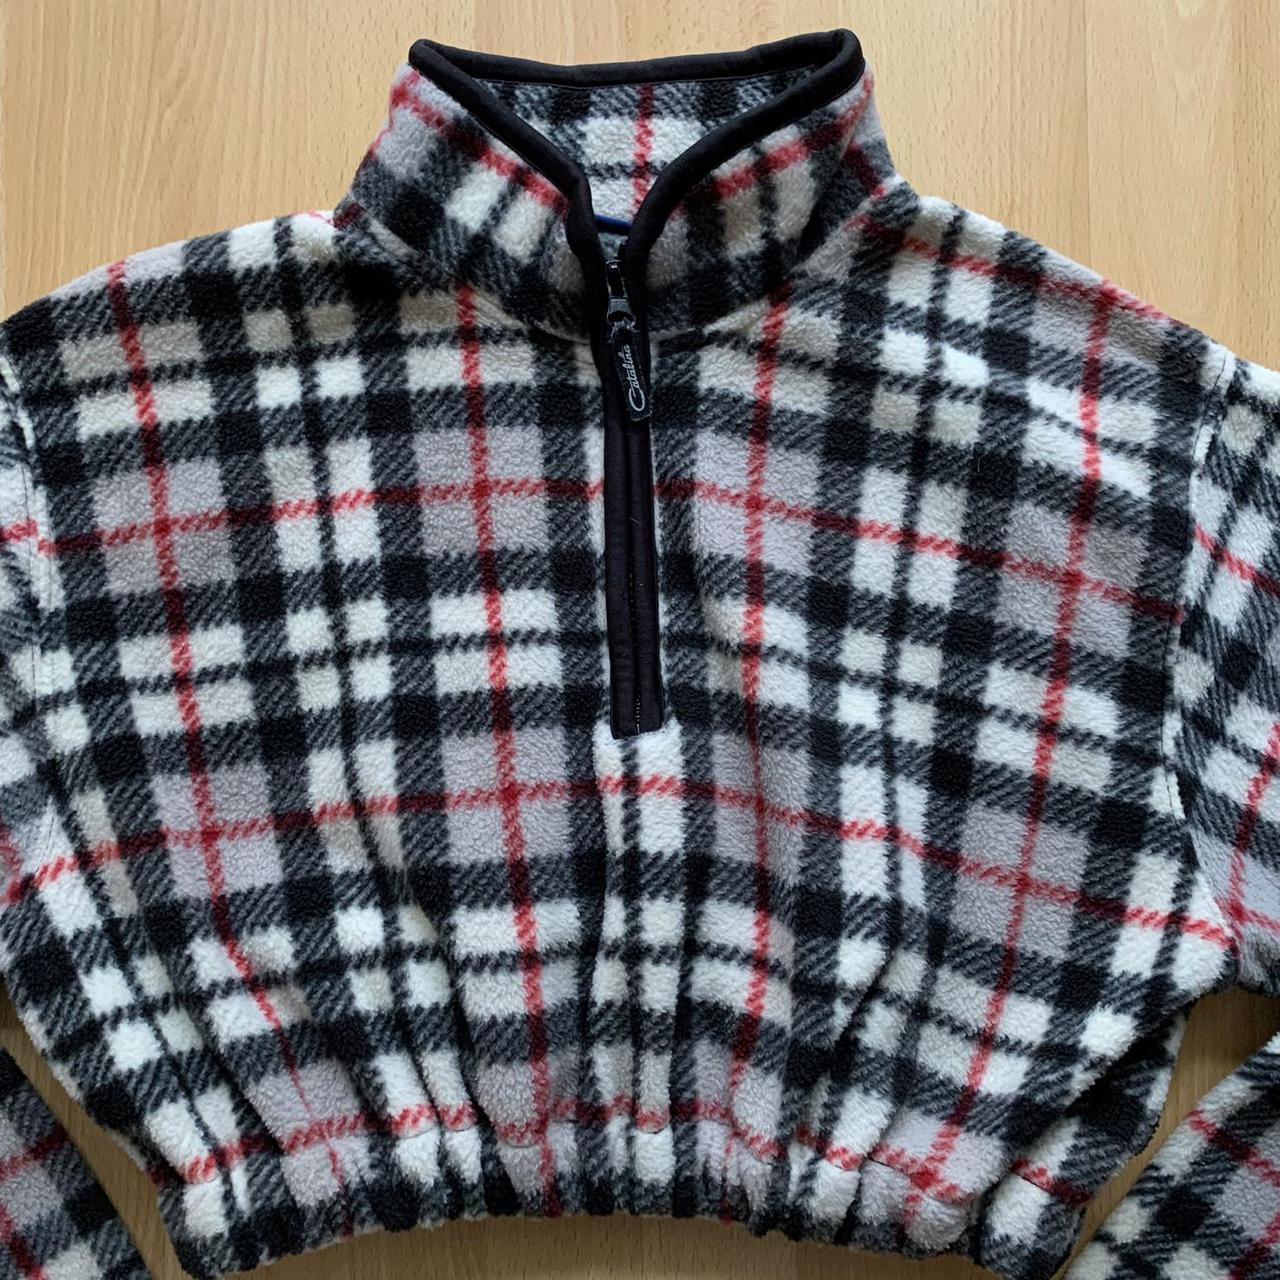 Product Image 3 - Adorable plaid fleece reworked crop